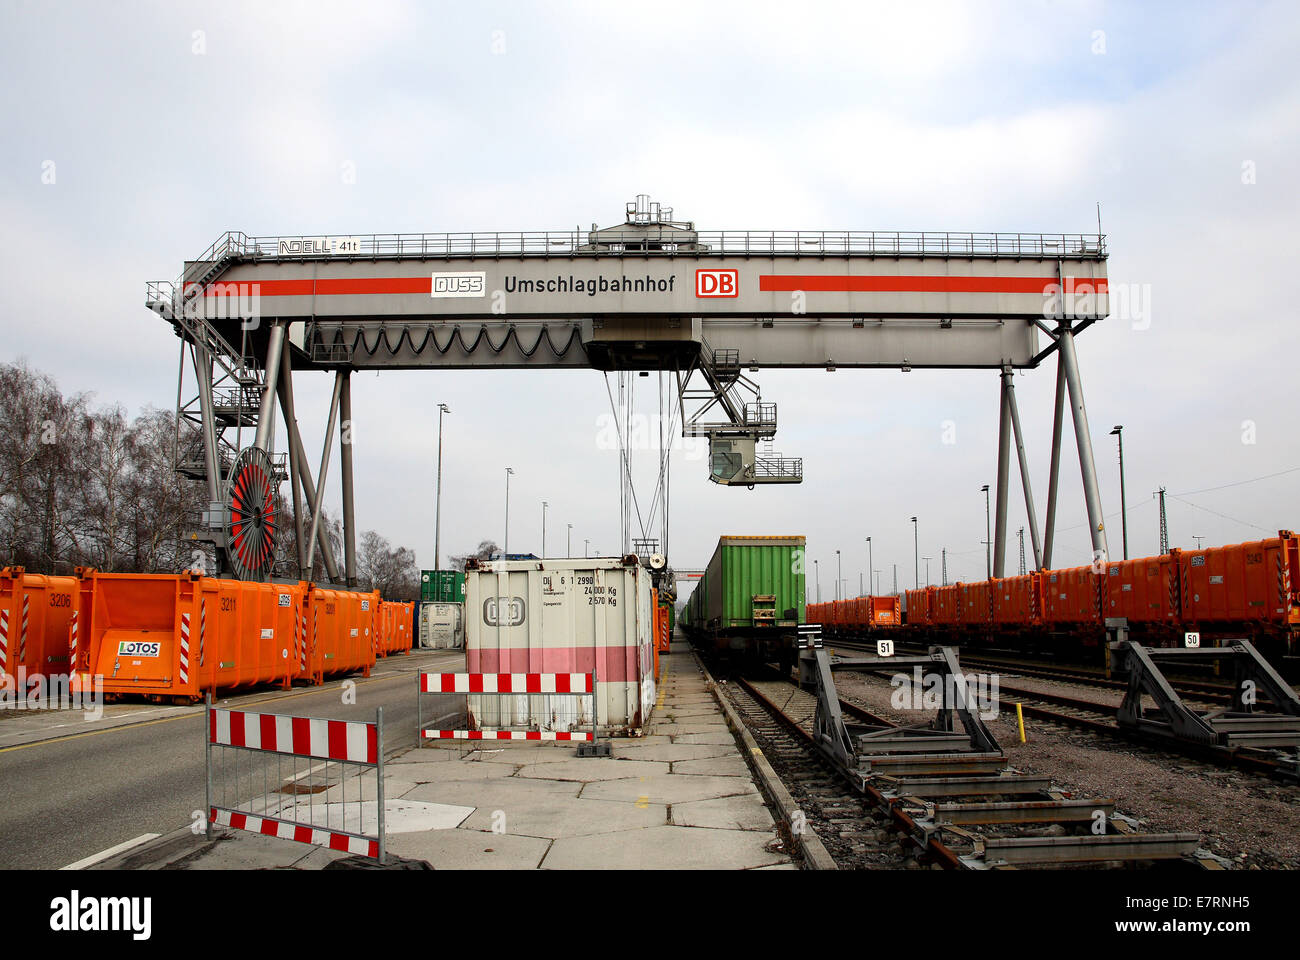 Railroad container terminal with bridge crane and freight cars, Karlsruhe, Germany, Jan. 29, 2009. Stock Photo